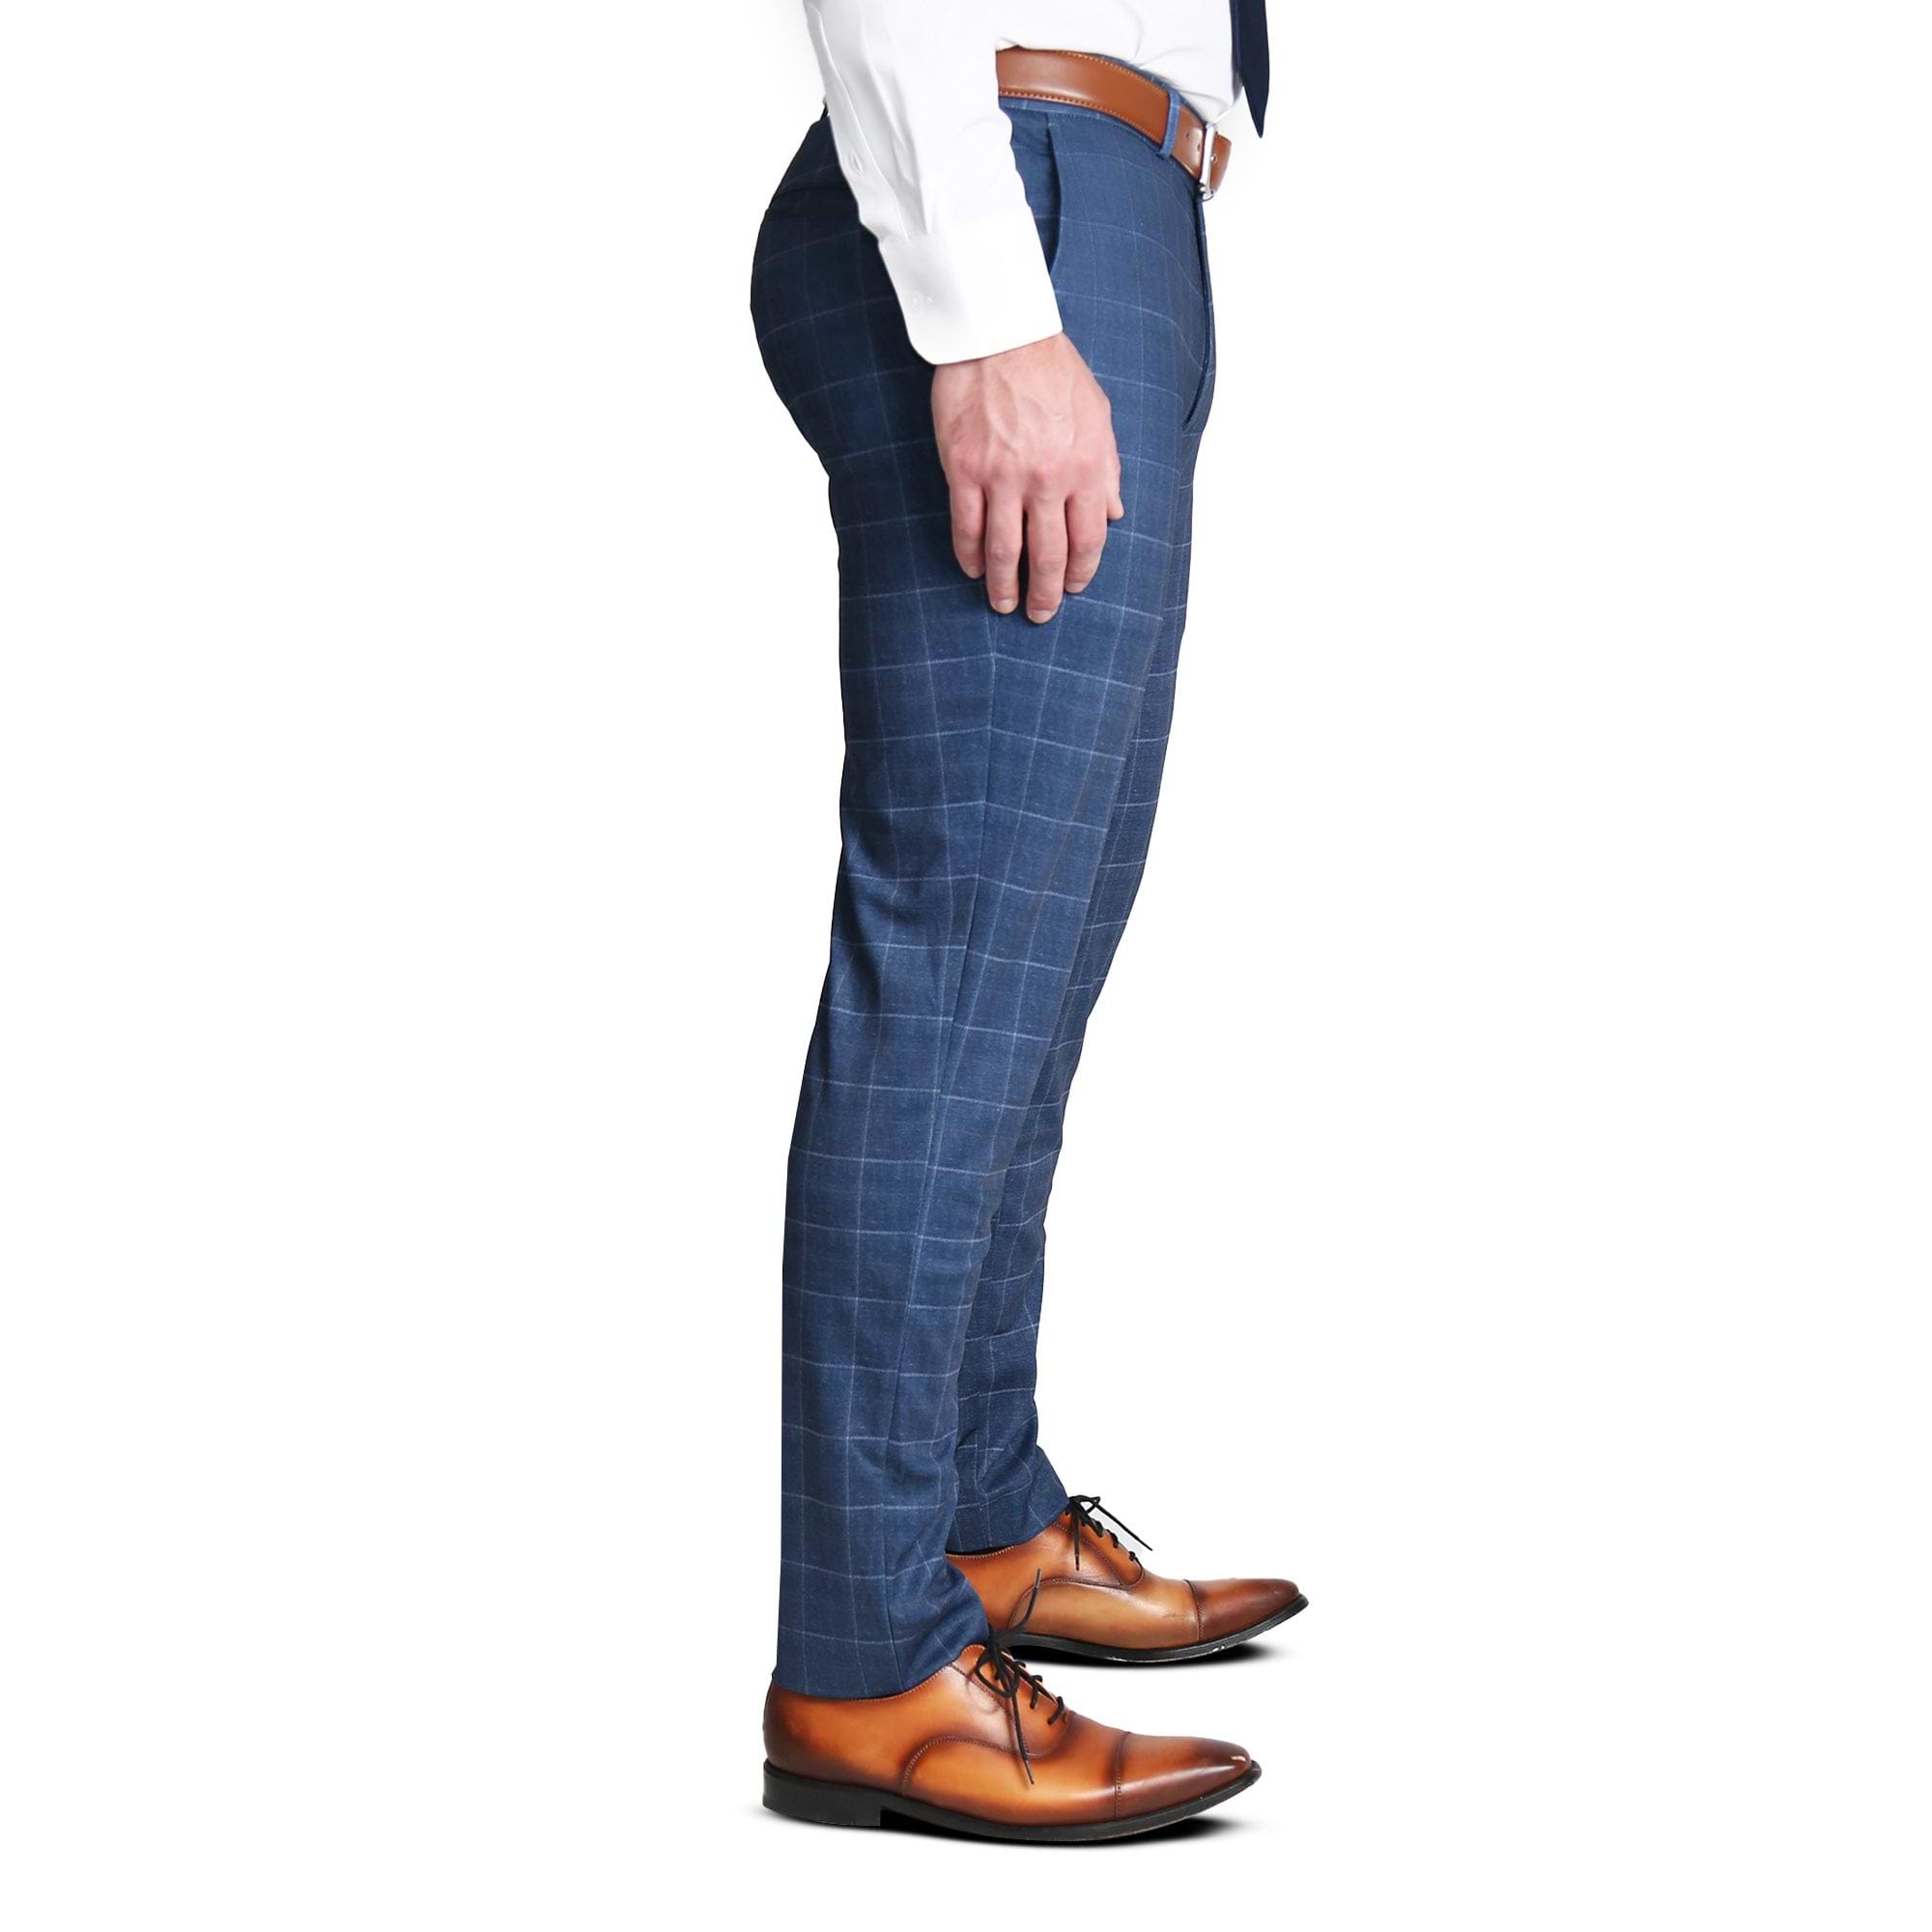 Brushed Tech Suit Pant - Heathered Blue With White Windowpane